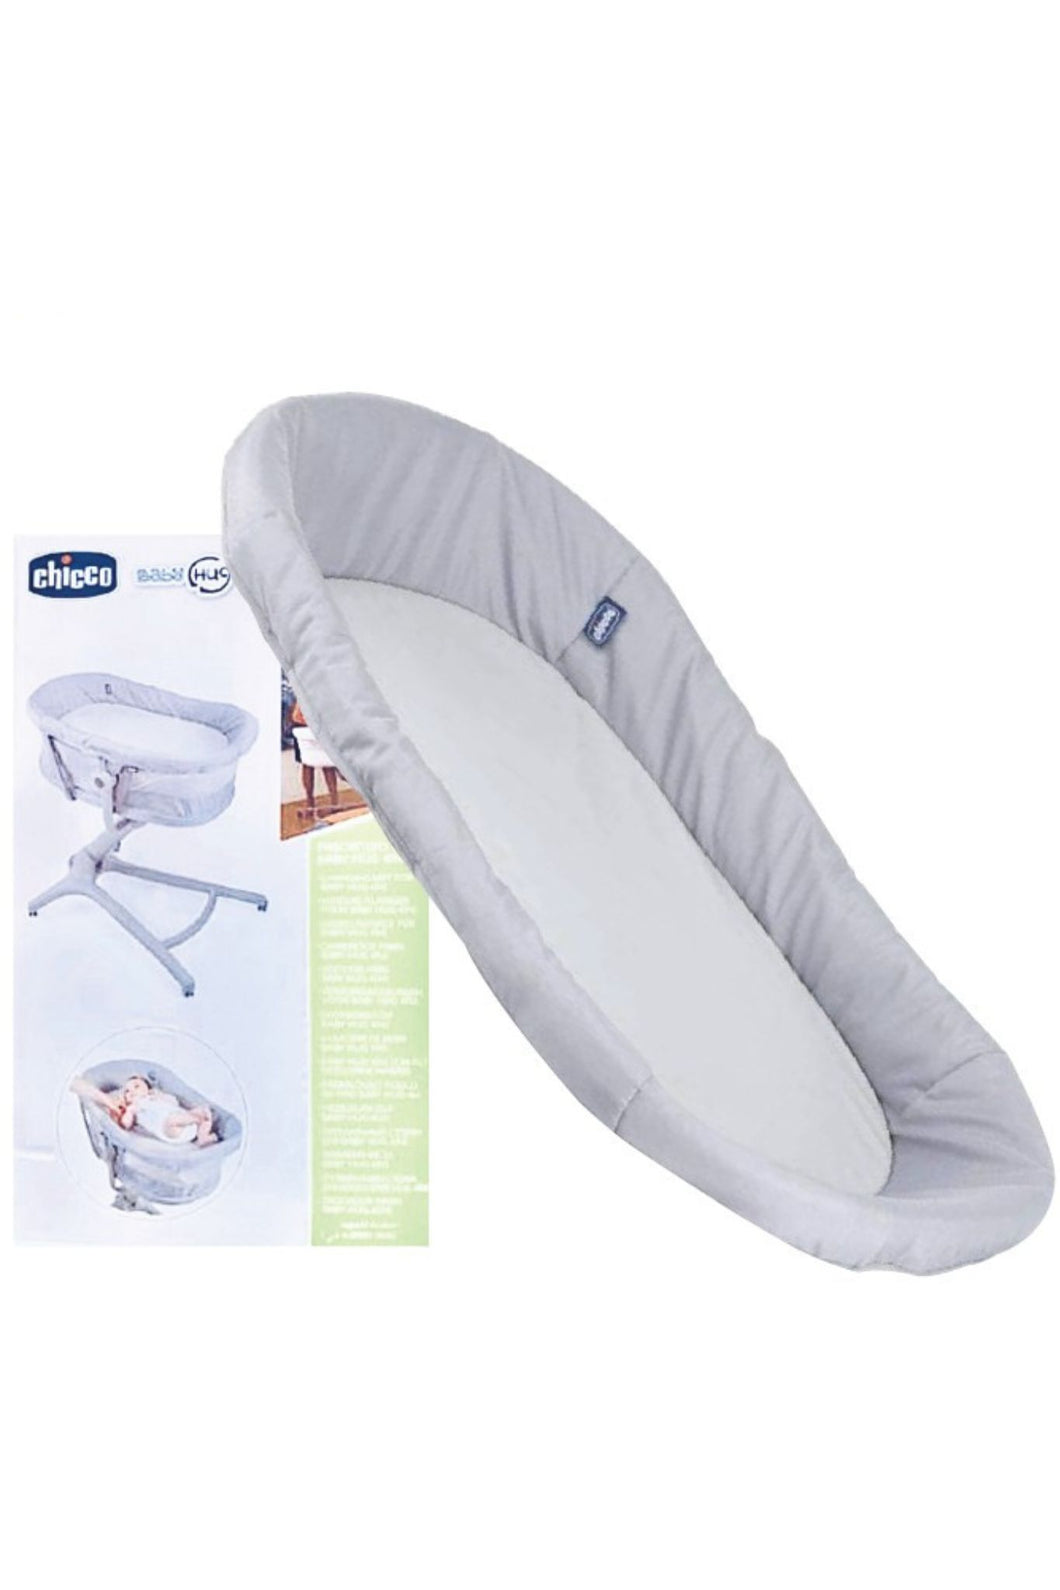 Chicco Baby Hug 4-in-1 Changer